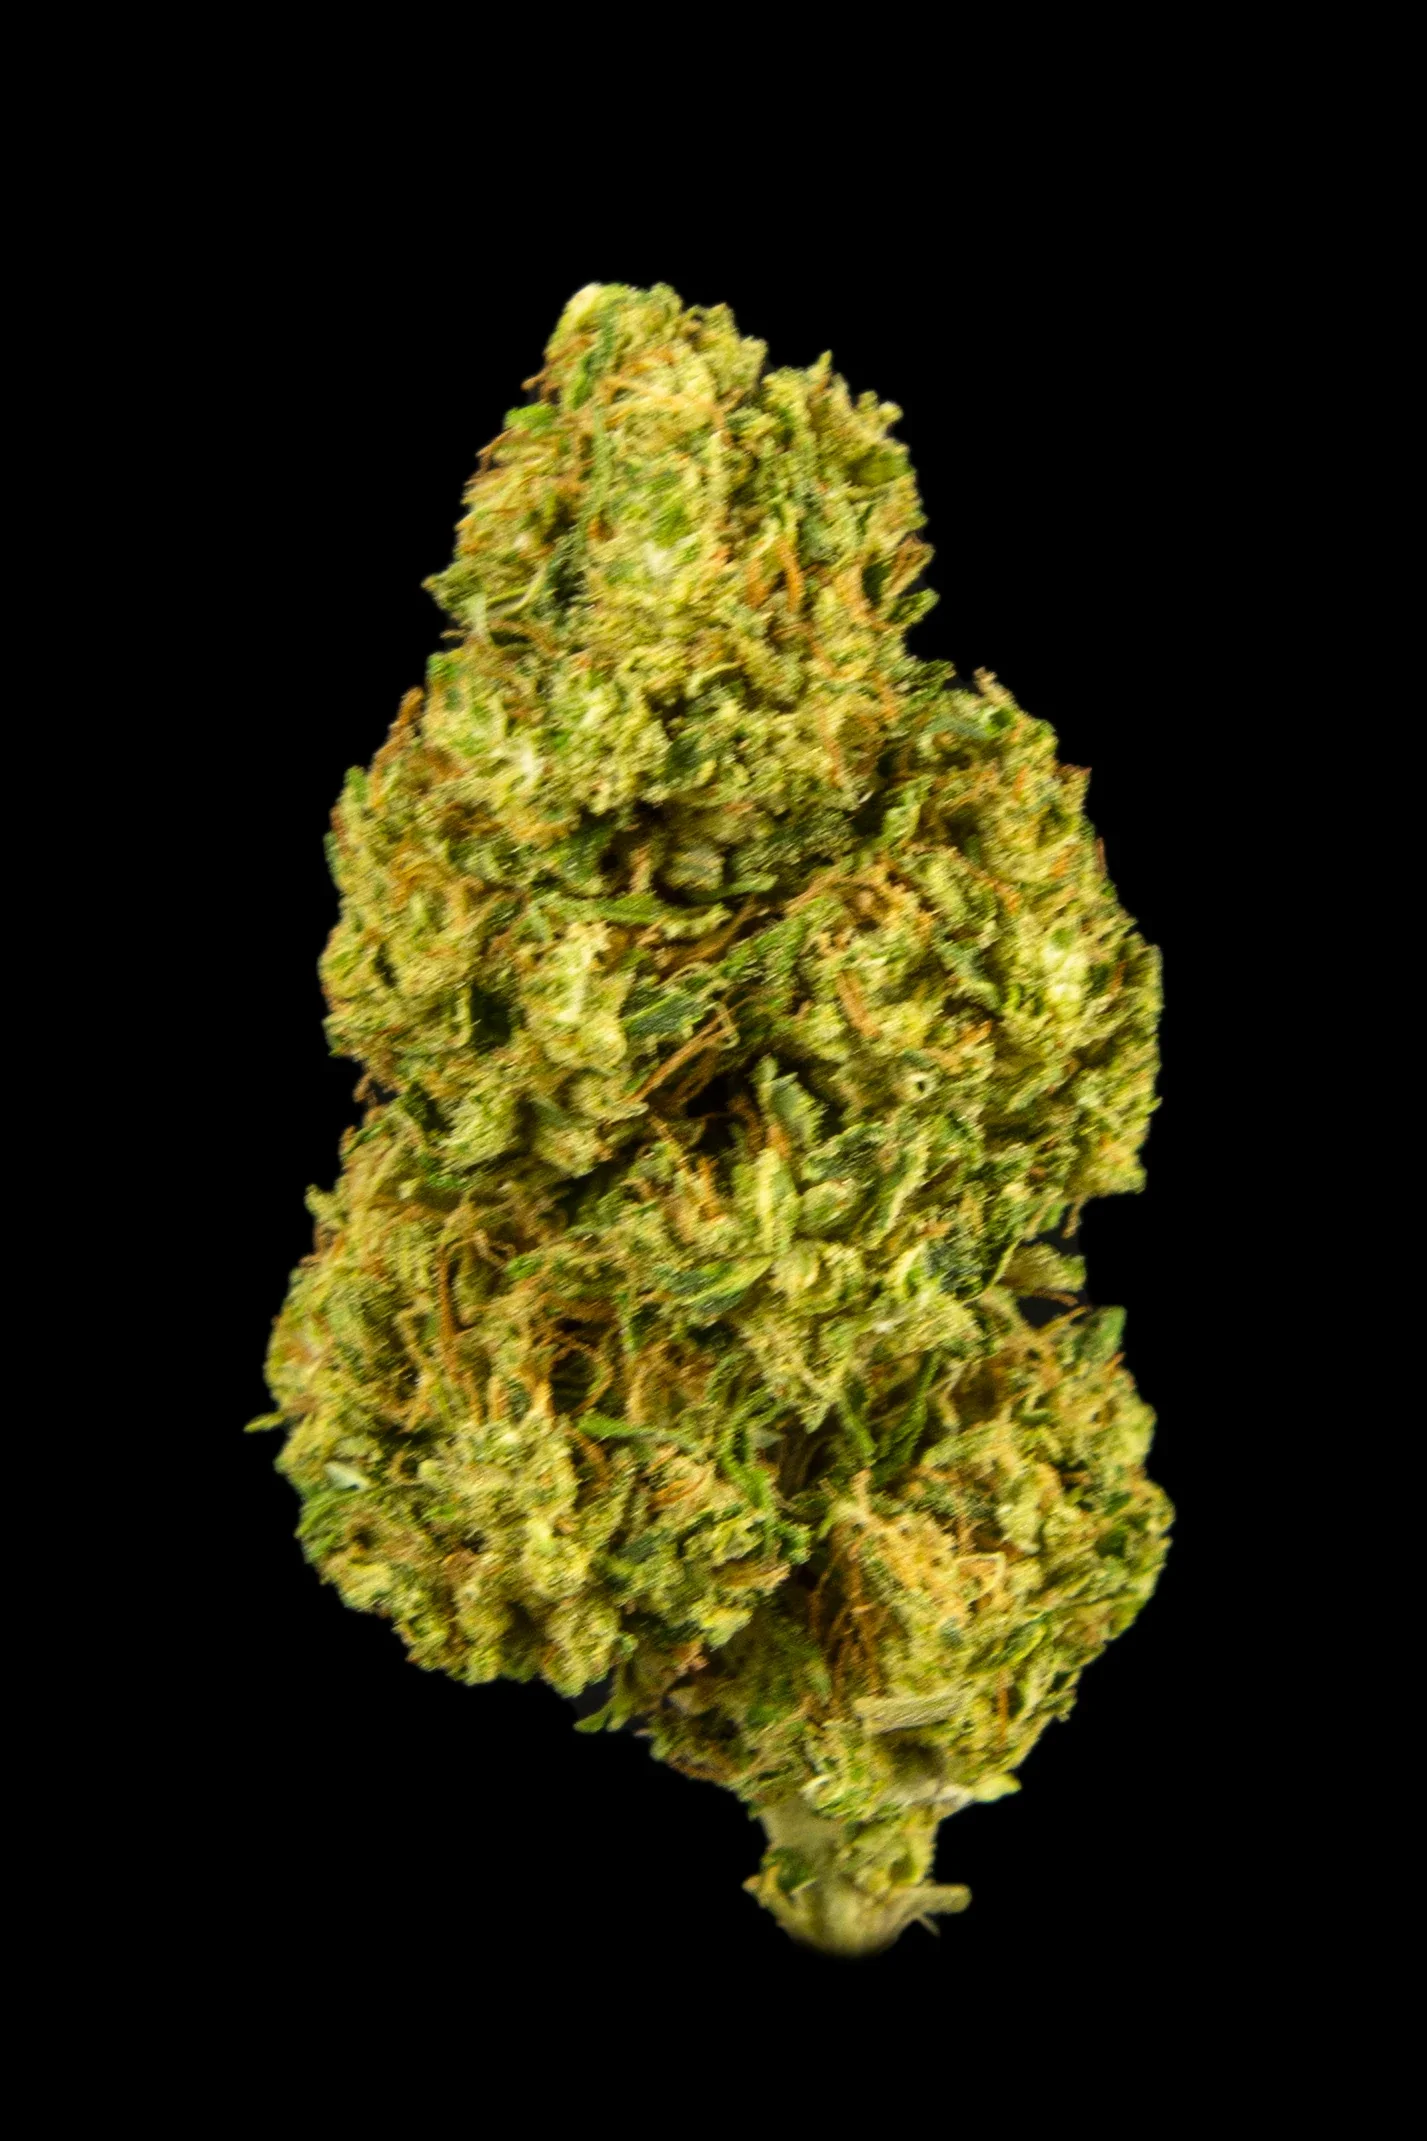 Image of Bammmer Sour Space Candy CBD Flower